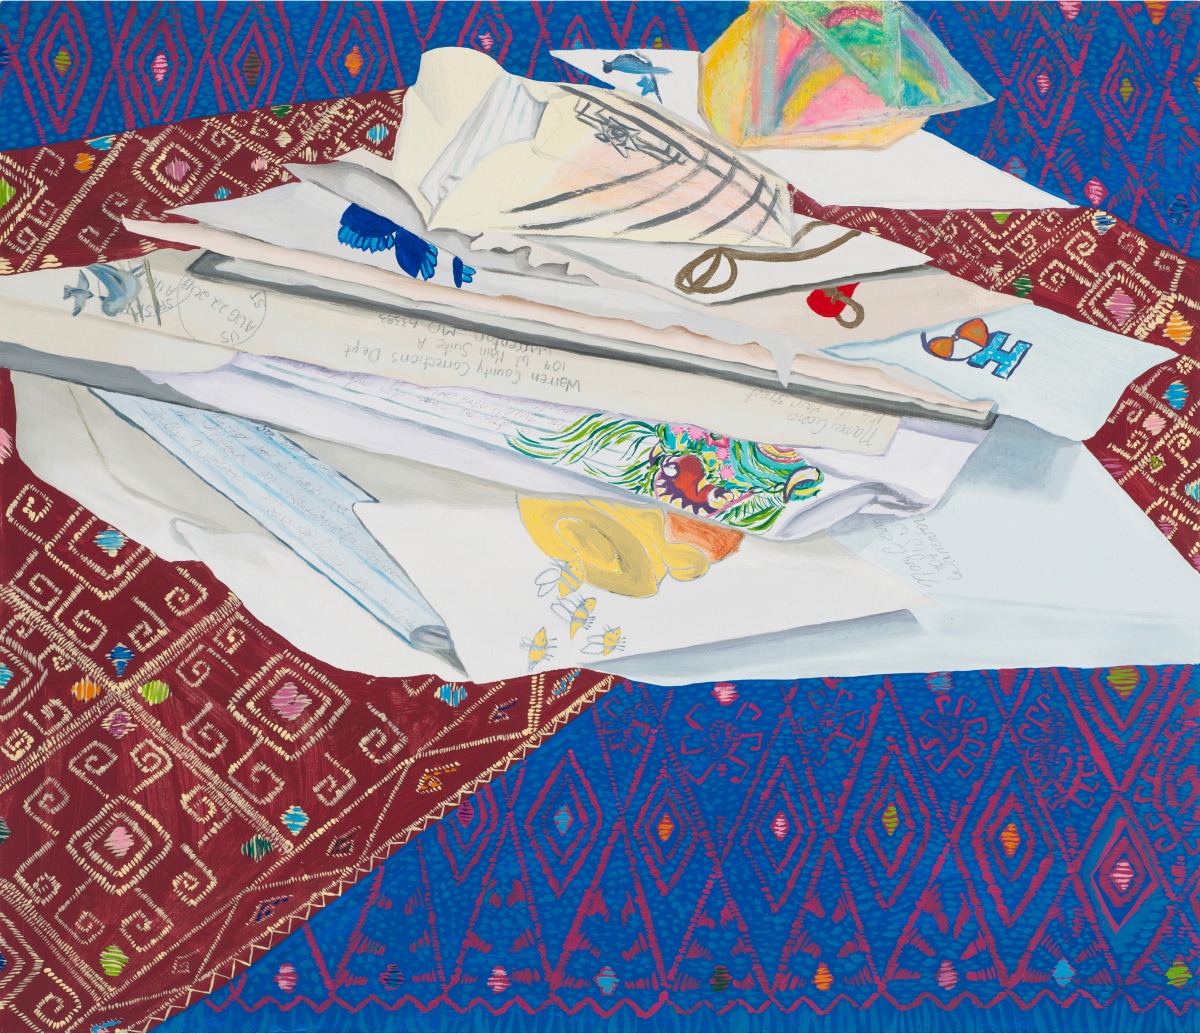 Artwork featuring a pile of papers, including drawings and letters, on a red and blue background